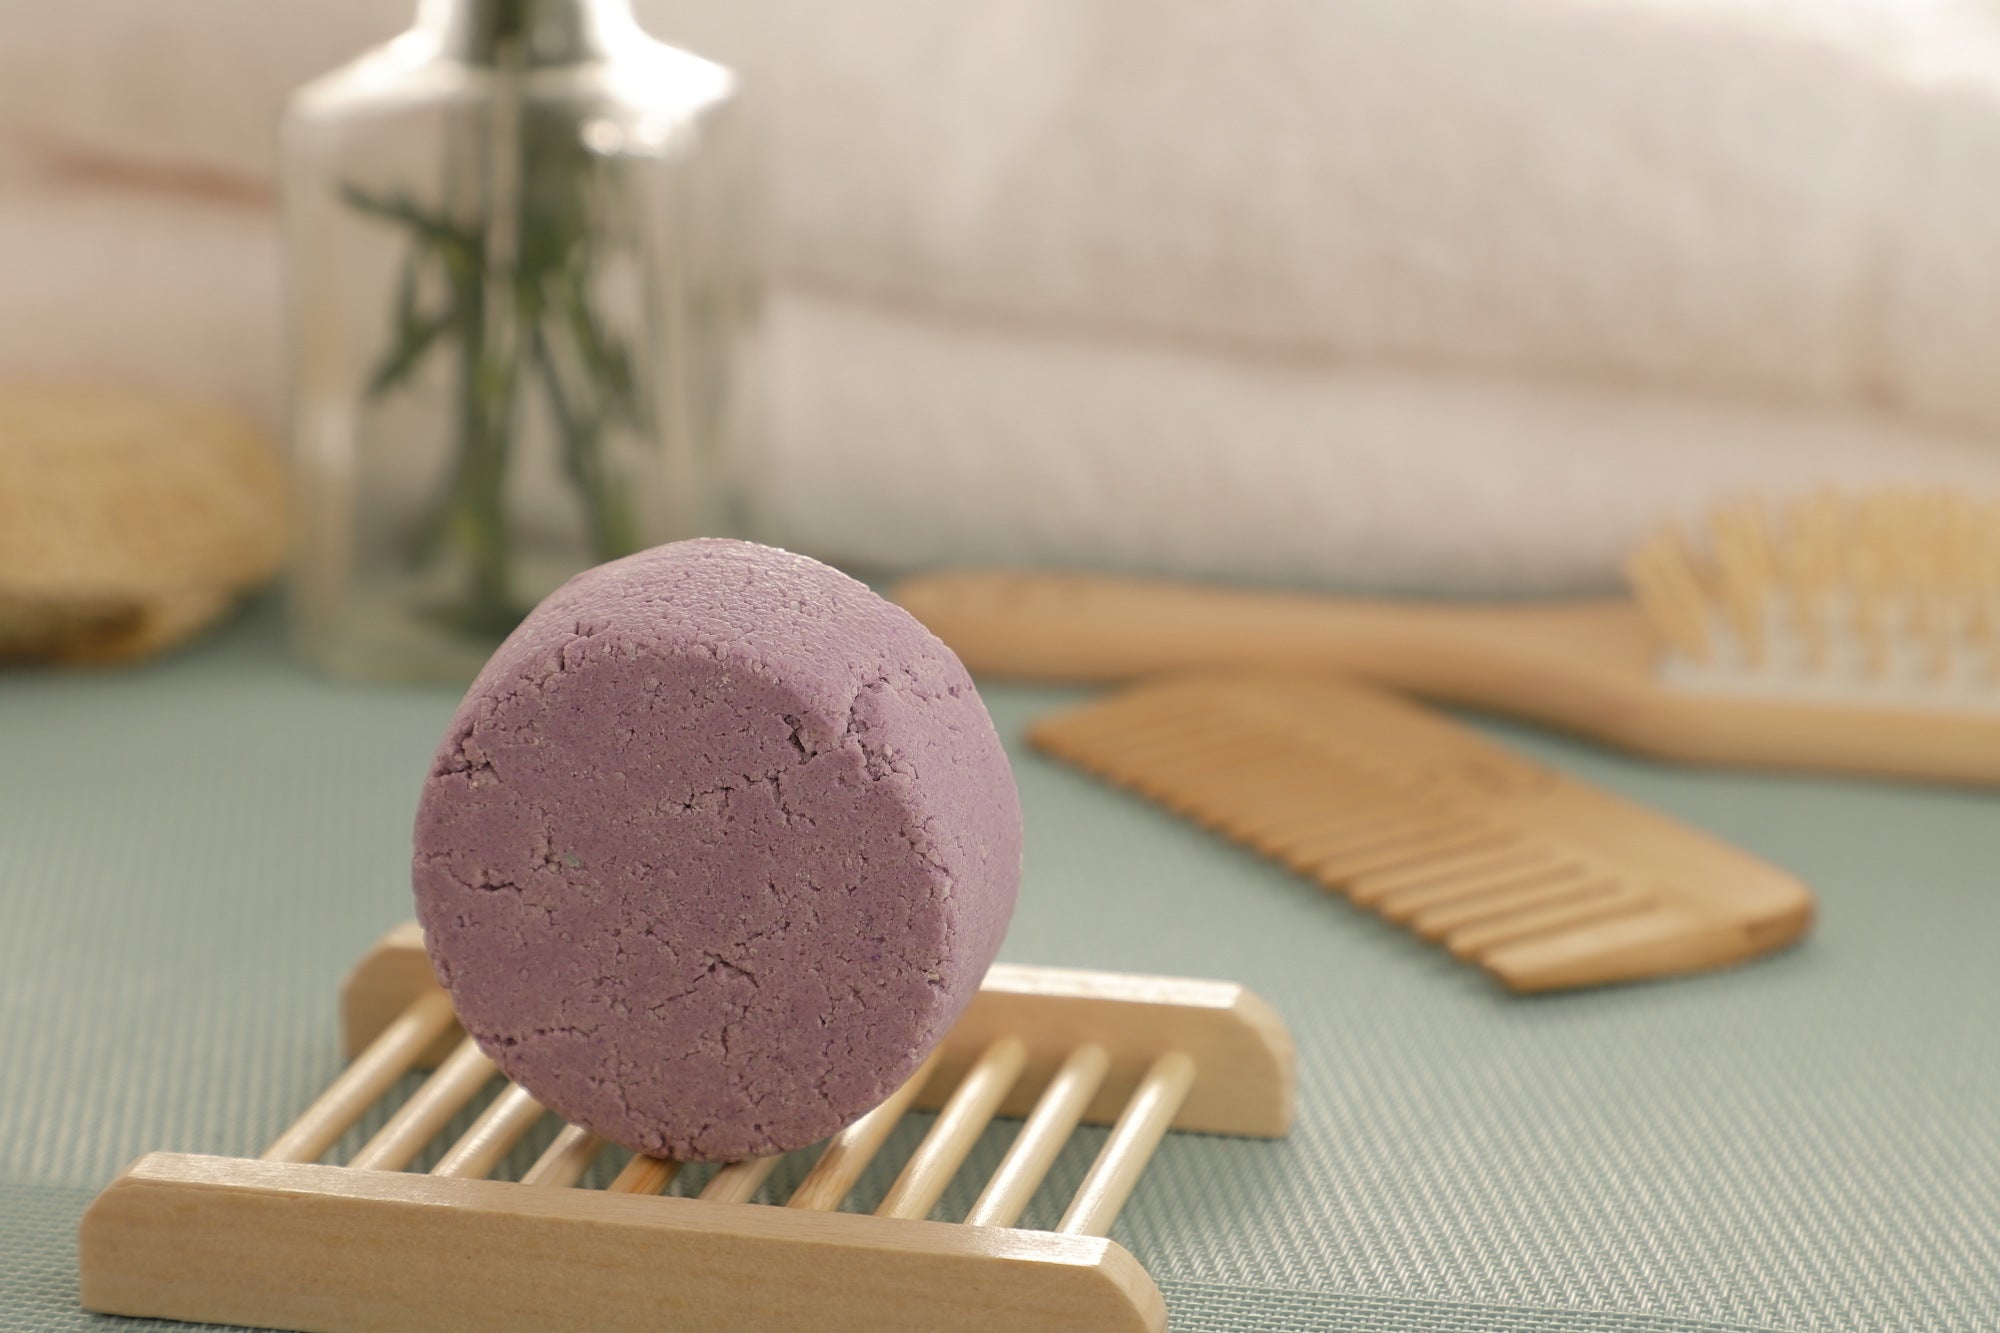 A purple handmade Natural Shampoo Bar with sulfate-free formula for promoting hair growth, showcased on a pristine white background.